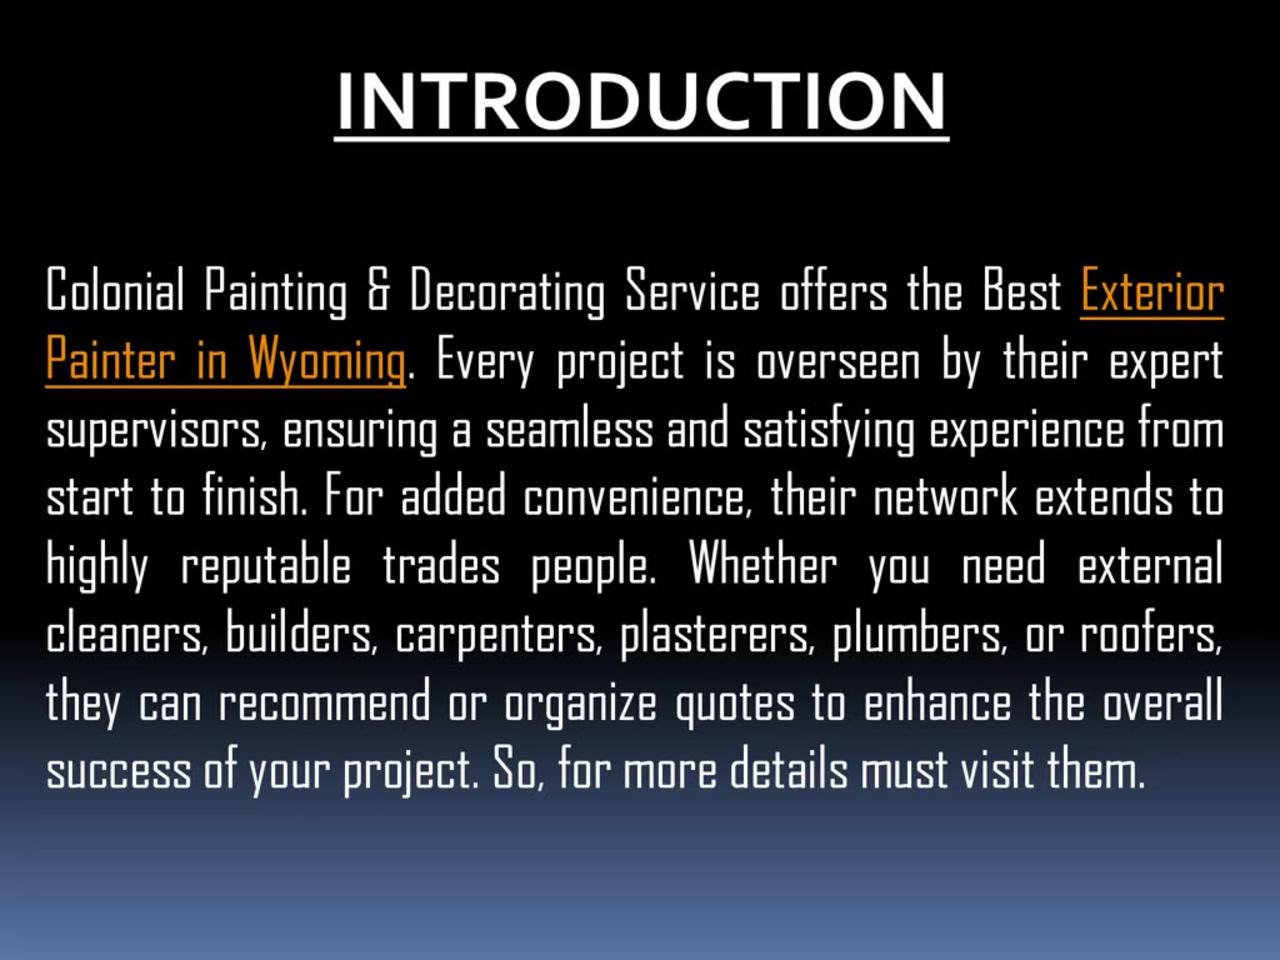 The Best Interior Painter in Wyoming